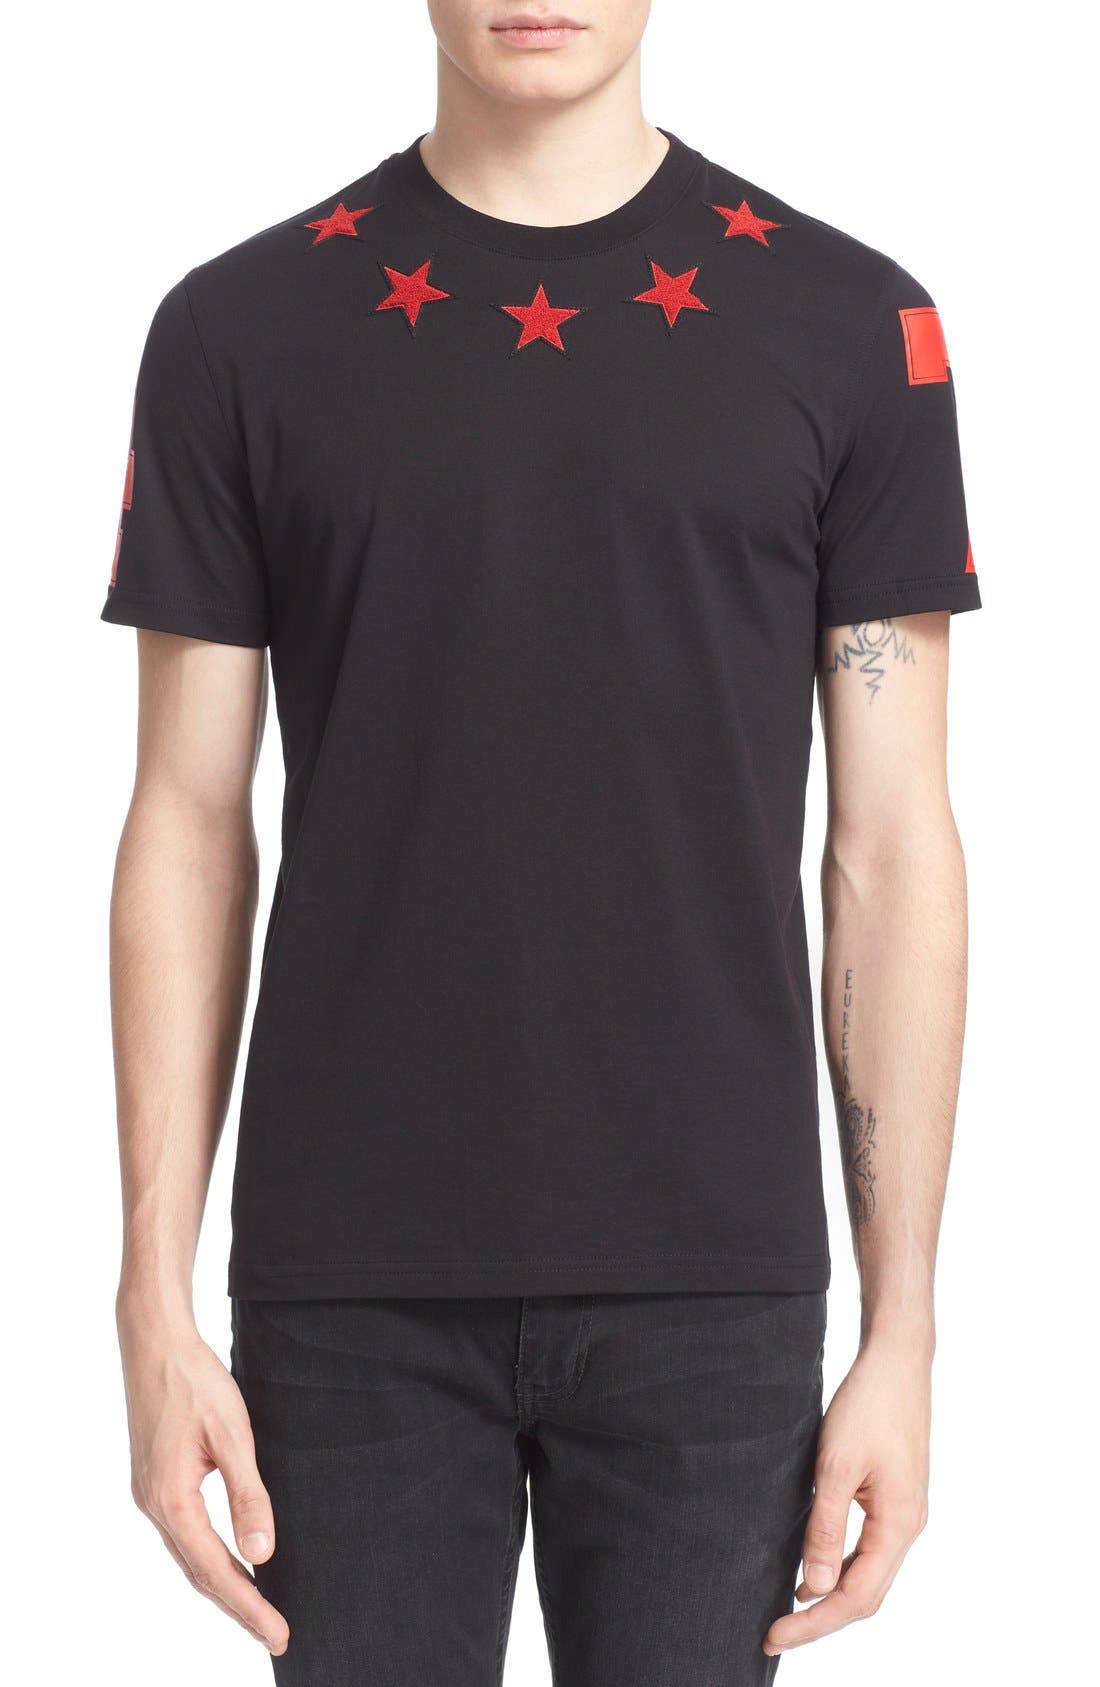 Givenchy '74 Stars' T-Shirt | Nordstrom